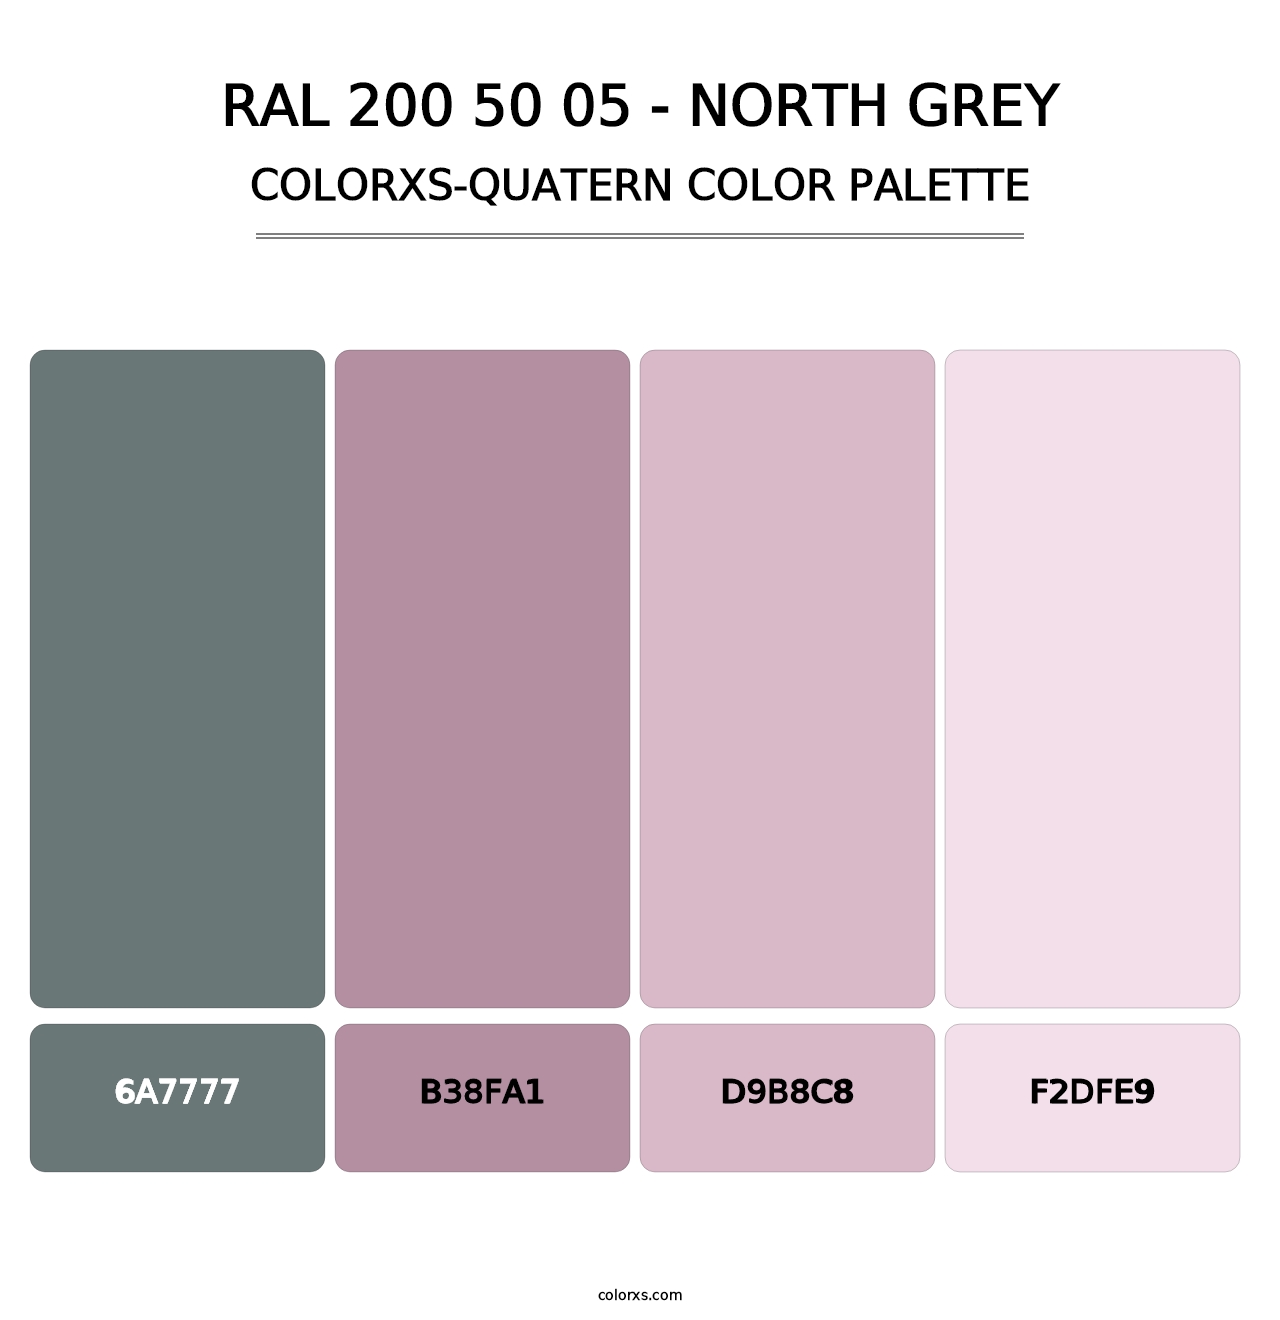 RAL 200 50 05 - North Grey - Colorxs Quatern Palette